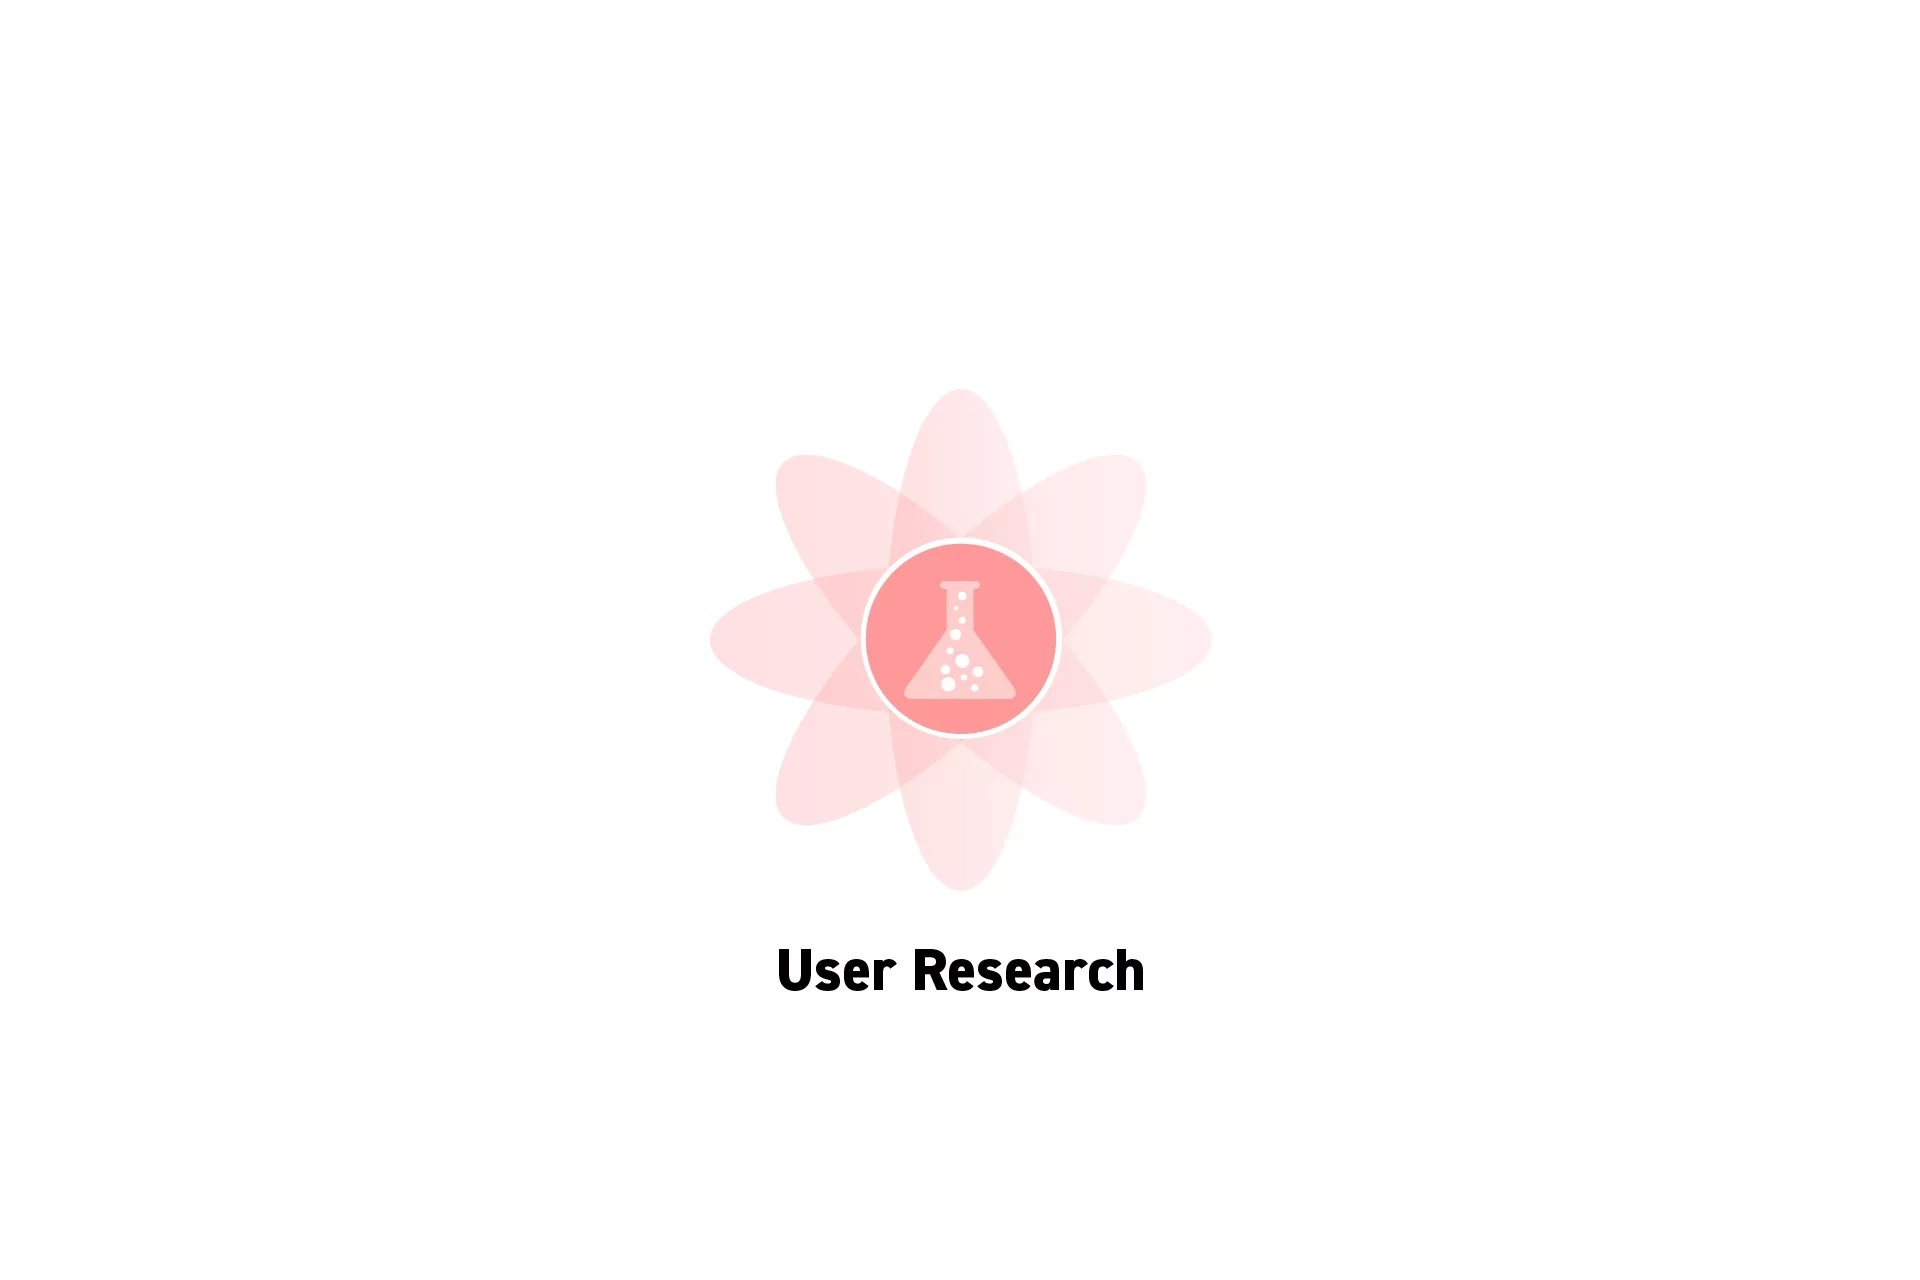 A flower that represents Strategy with the text "User Research" beneath it.